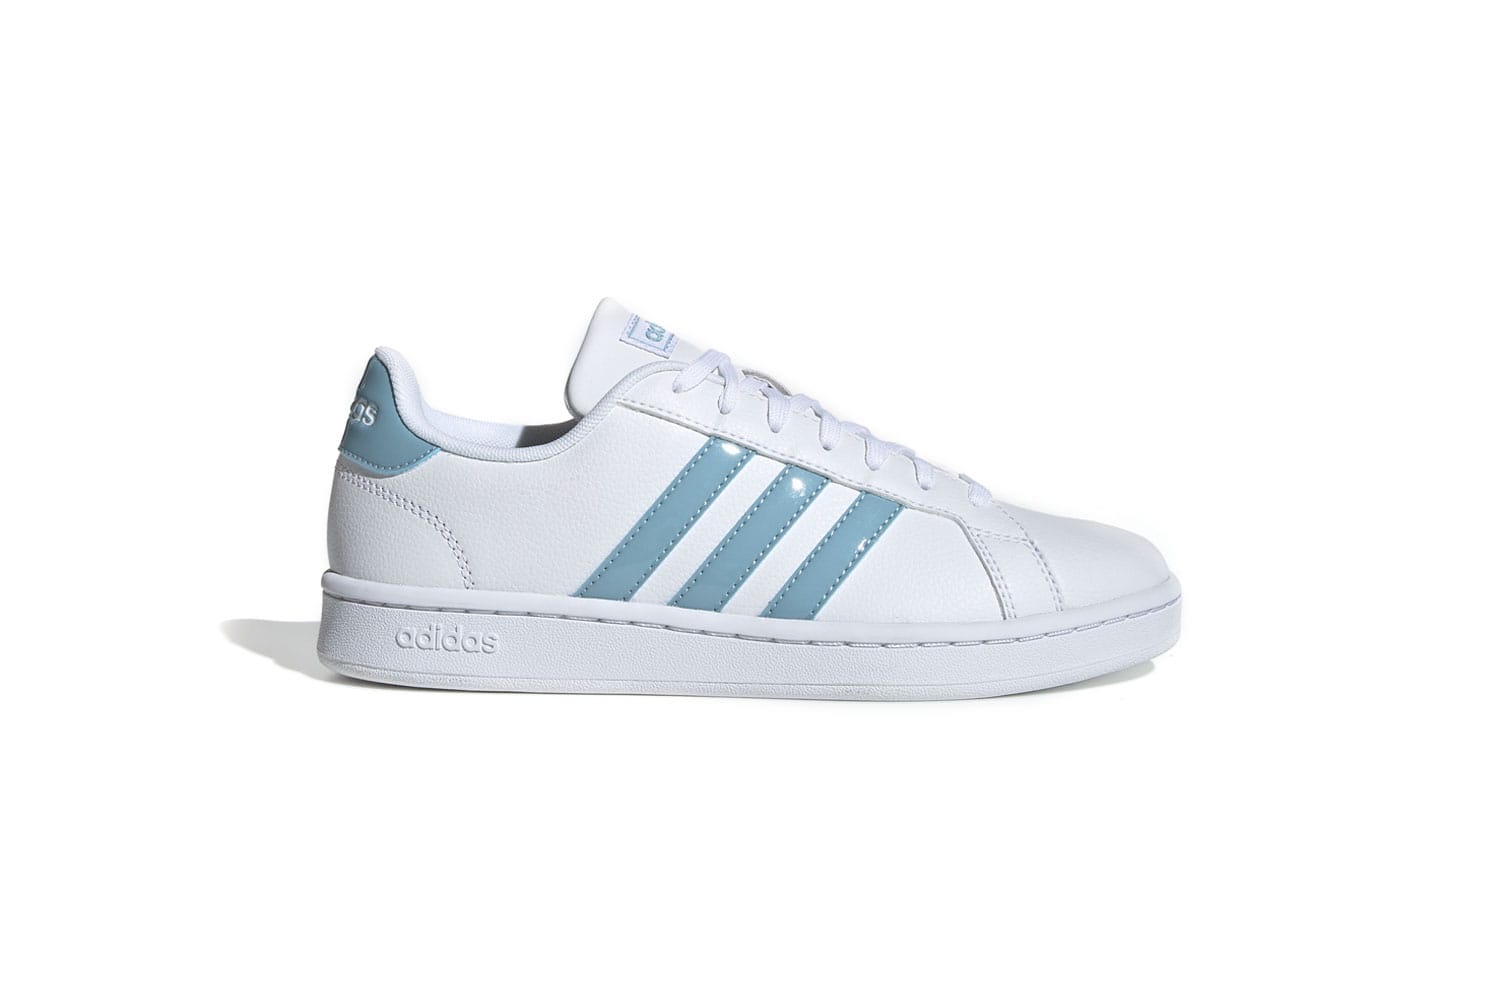 adidas blue sneaker shoes